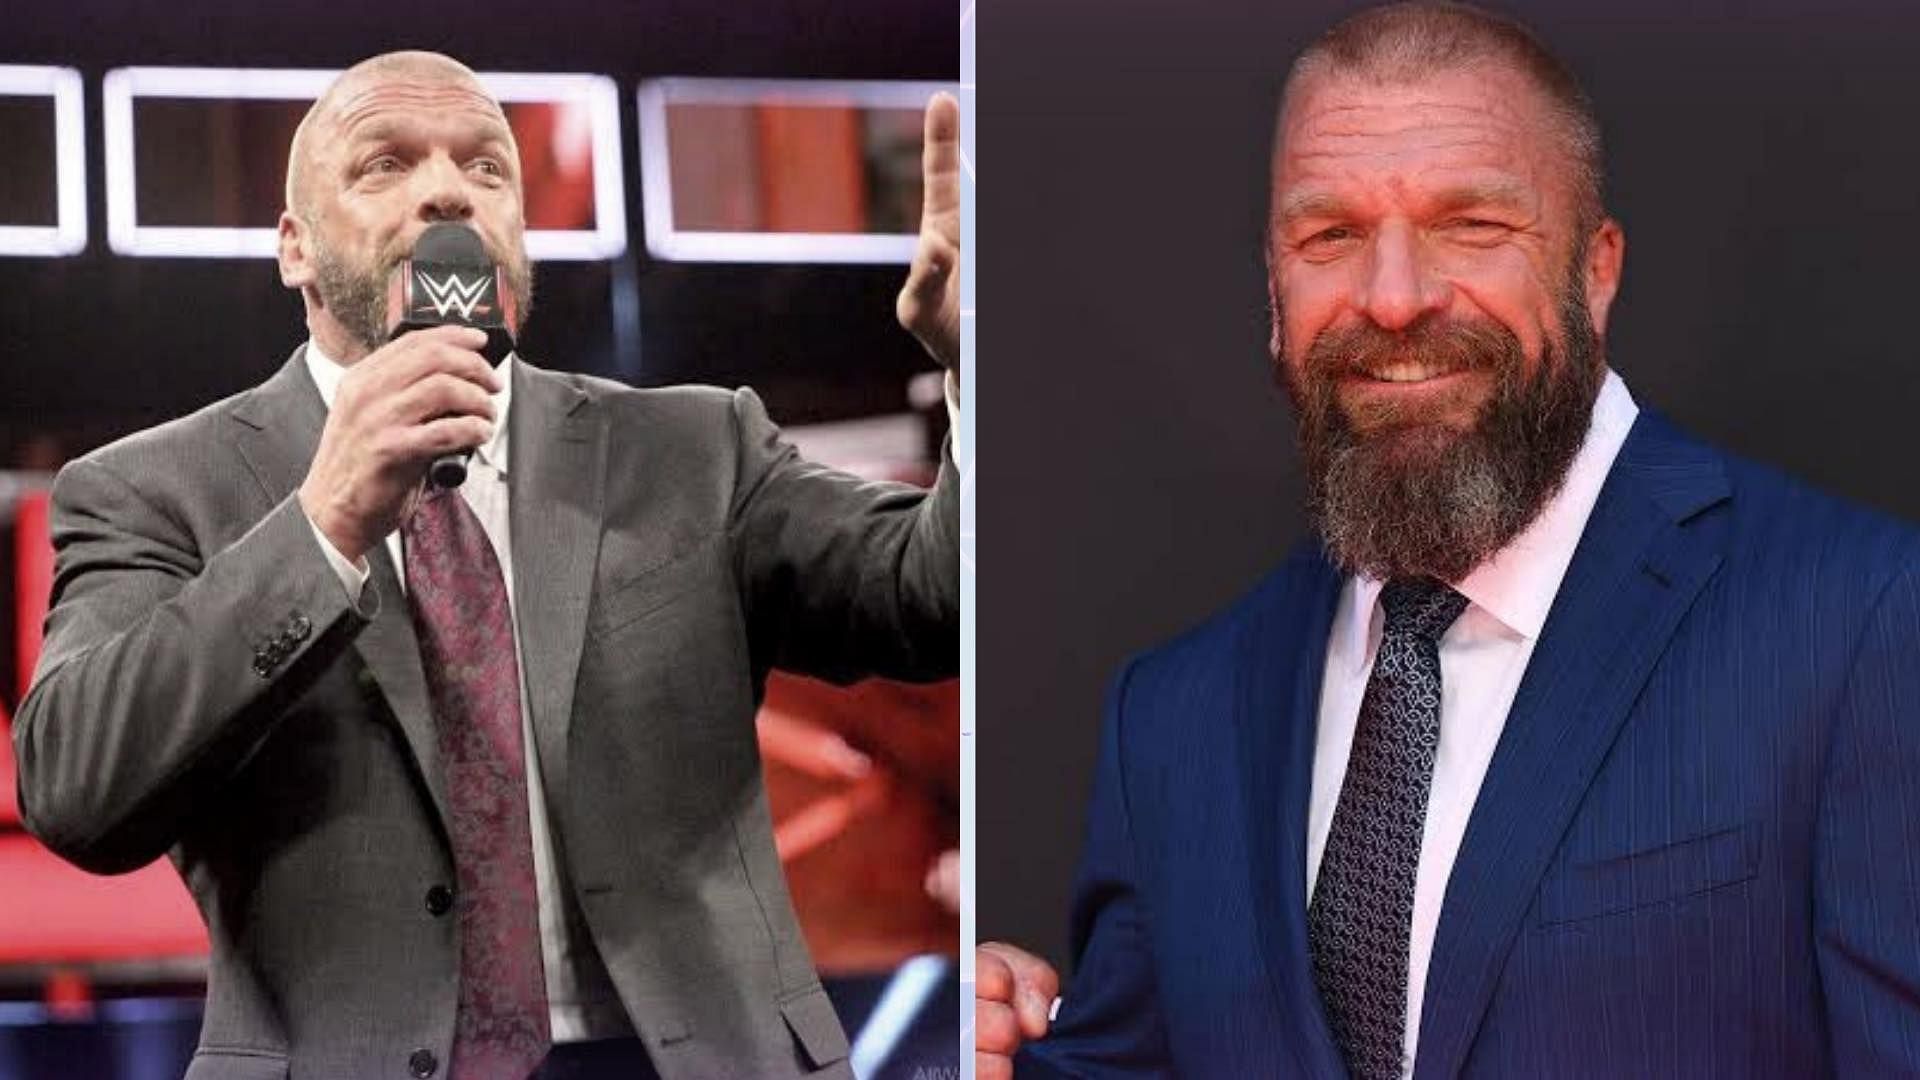 Triple H could potentially re-sign a former champion back to WWE